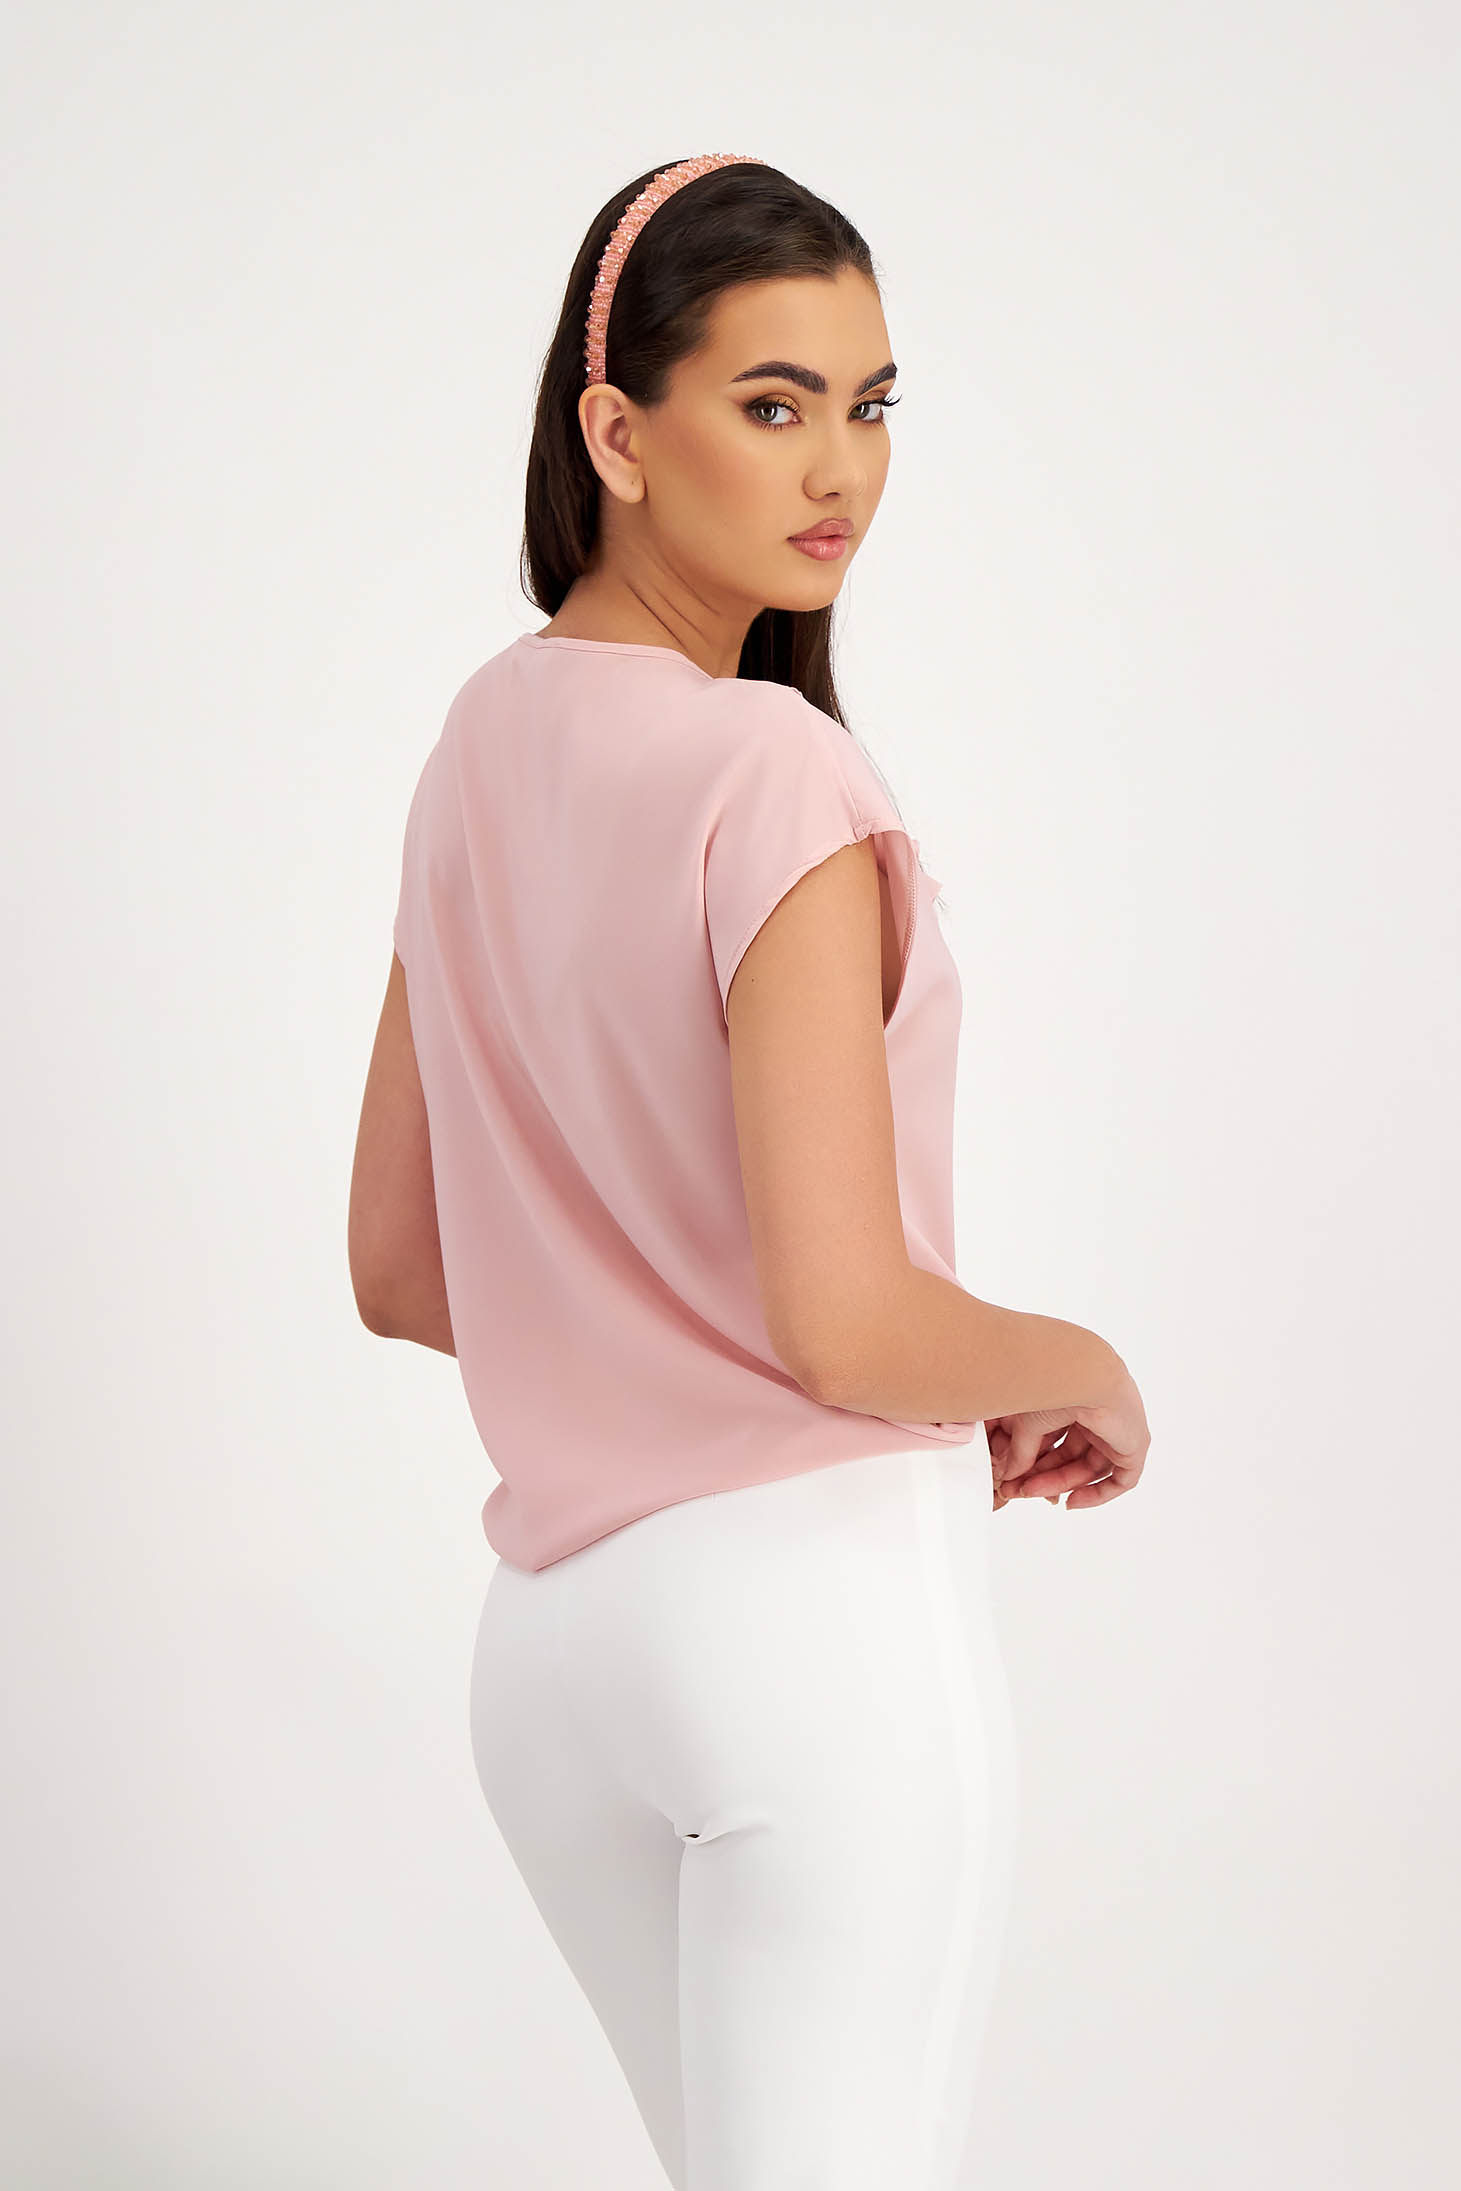 Light Pink Voile Women's Blouse with Wide Cut and Asymmetrical Front Frill - StarShinerS 2 - StarShinerS.com